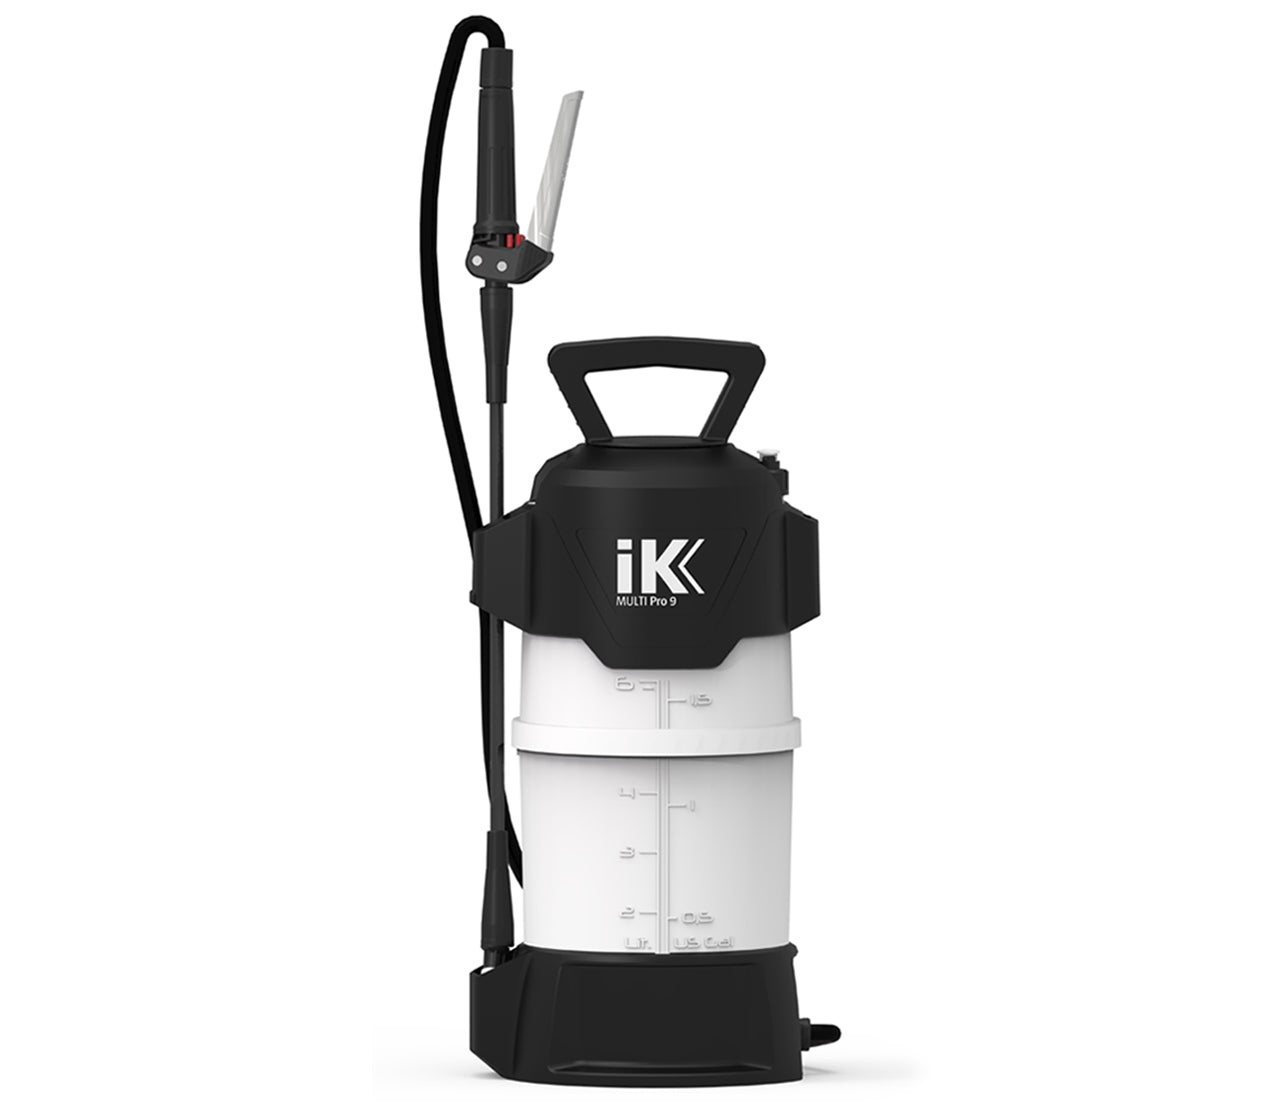 The IK Foam Pro 2+  How To Get The Best Out of it ! And What